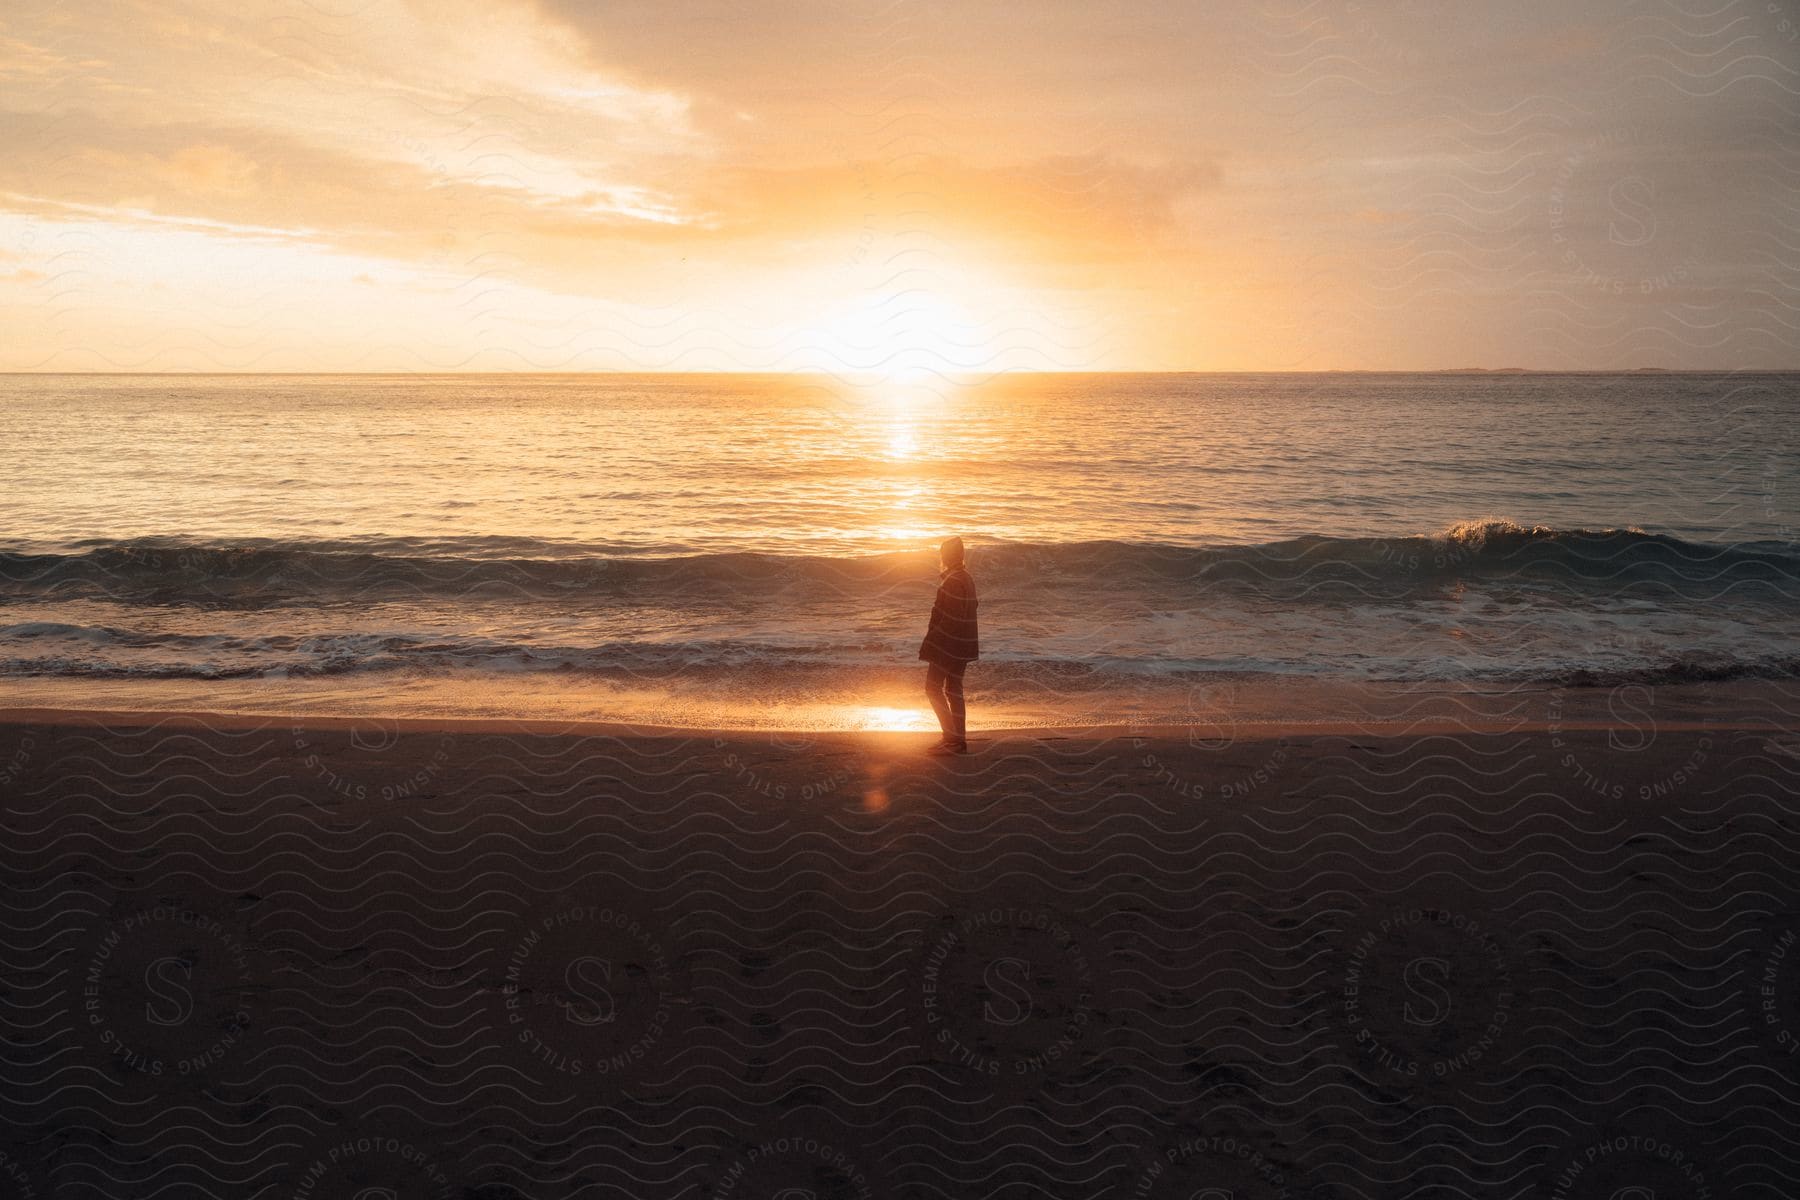 Silhouette of a person standing on a beach as waves roll in and the sun sets on the horizon